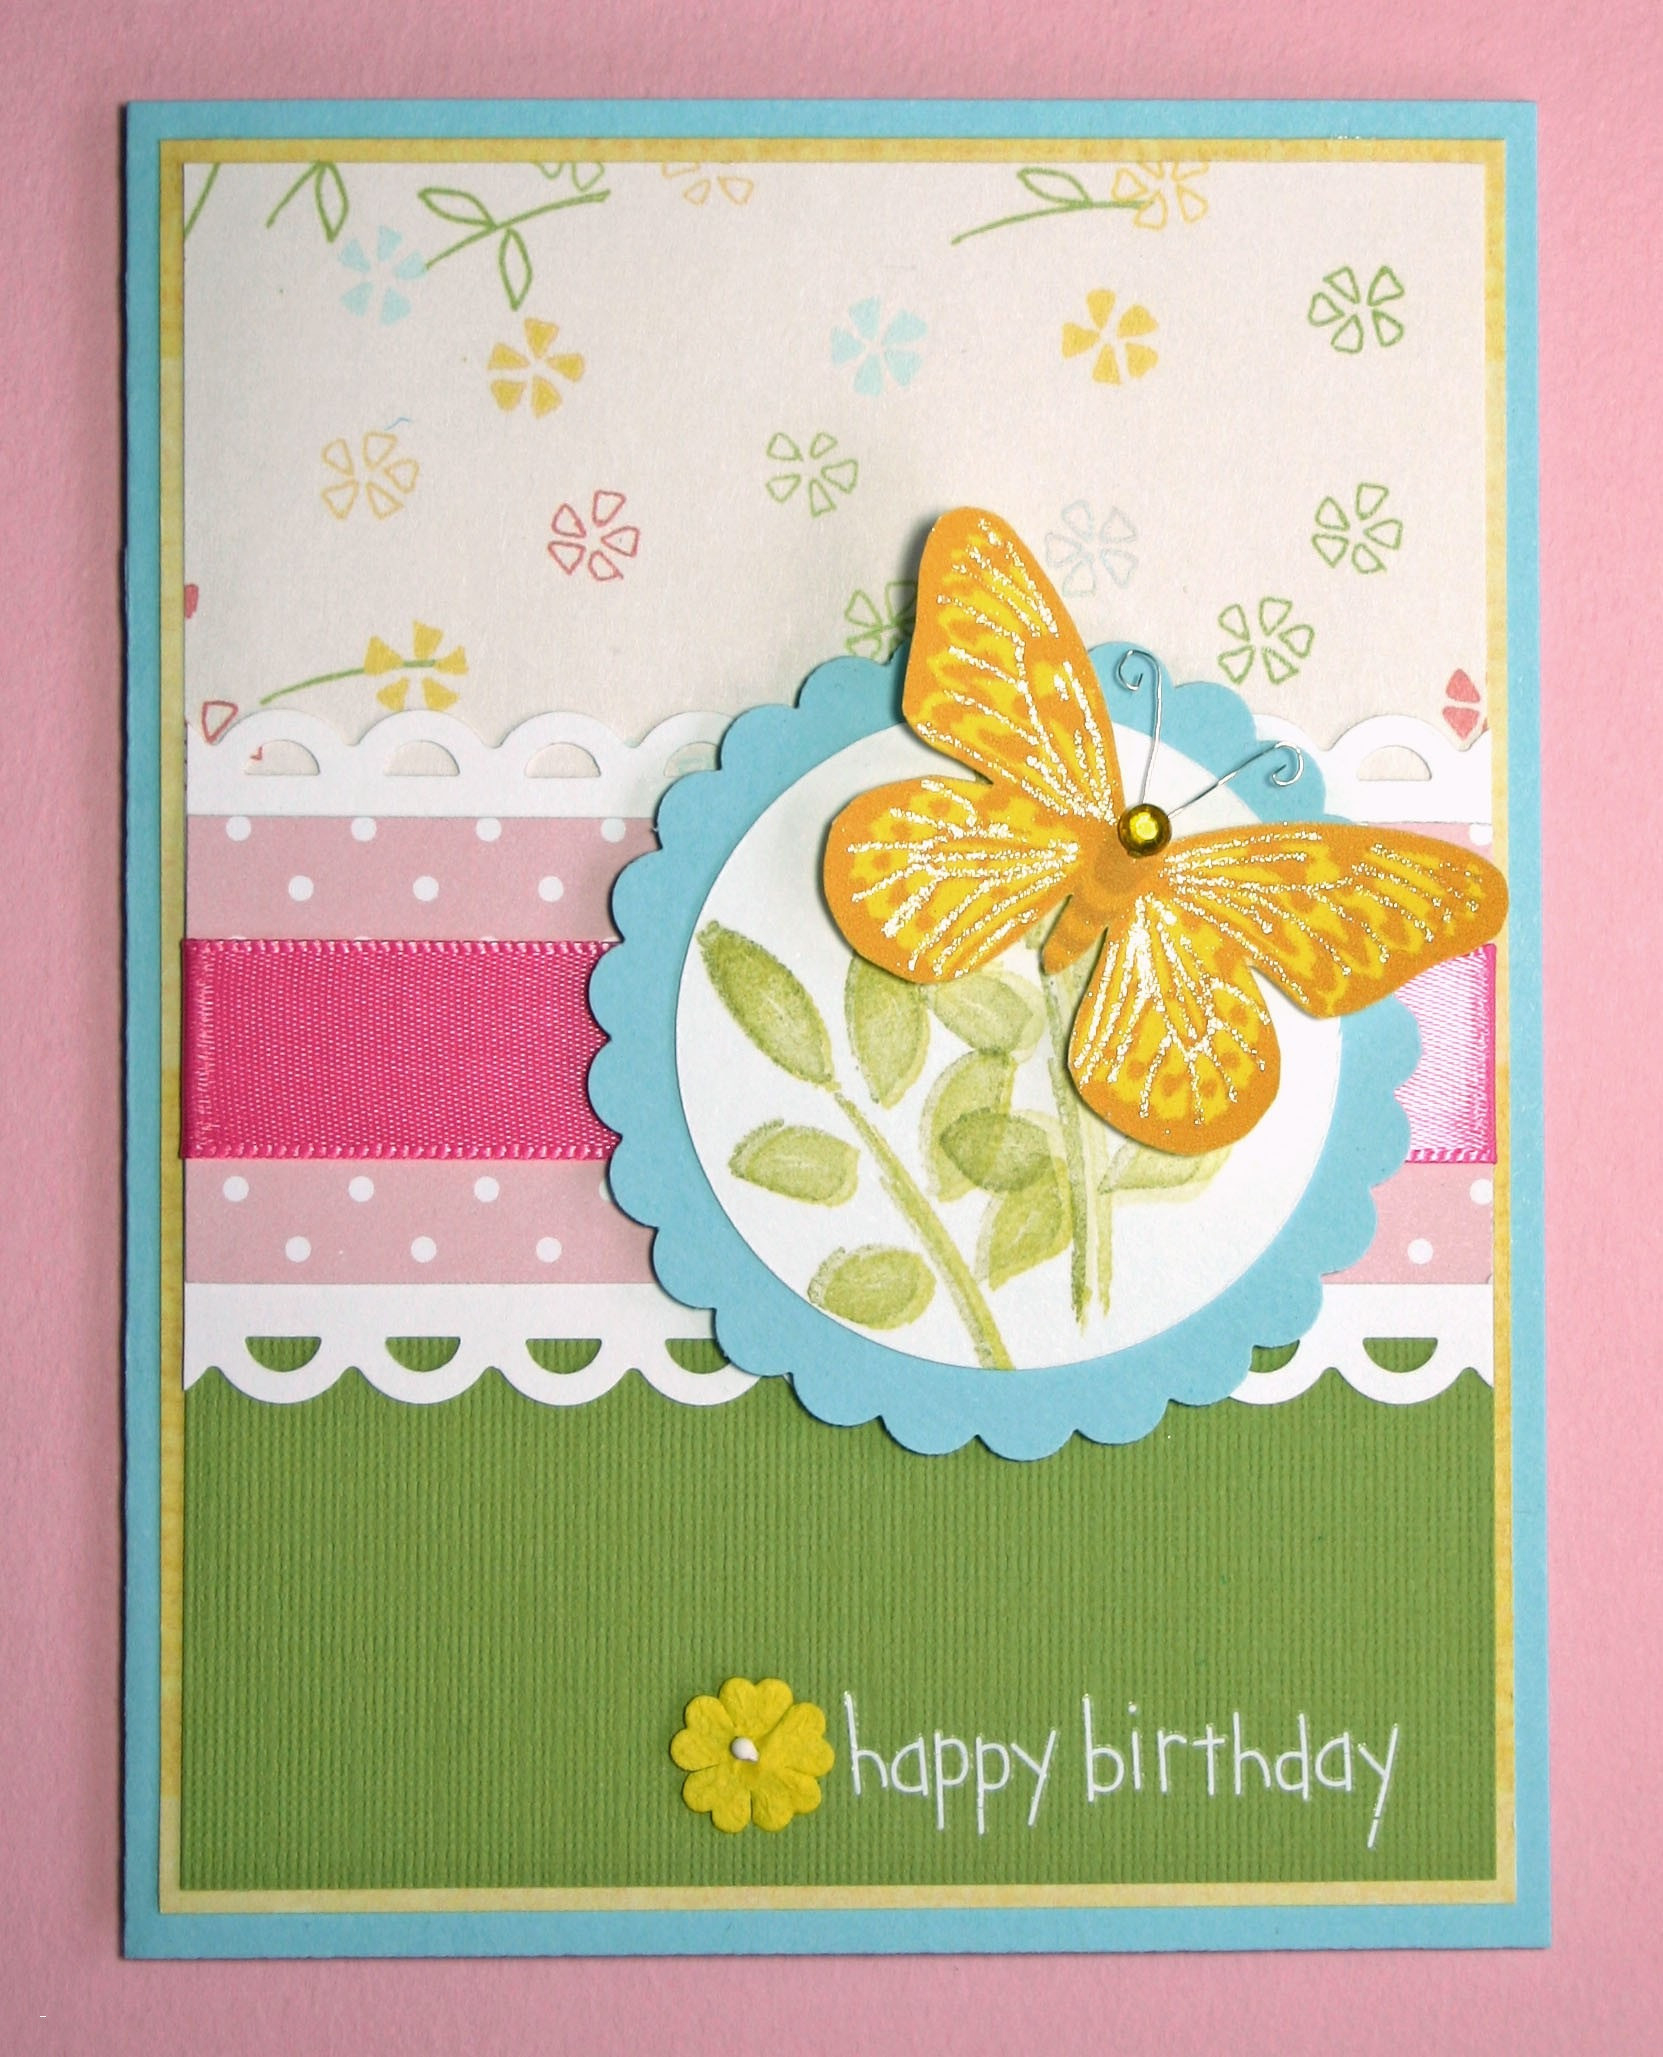 Birthday Card Making Ideas For Husband How To Make Handmade Birthday Cards For Husband Cardfssn